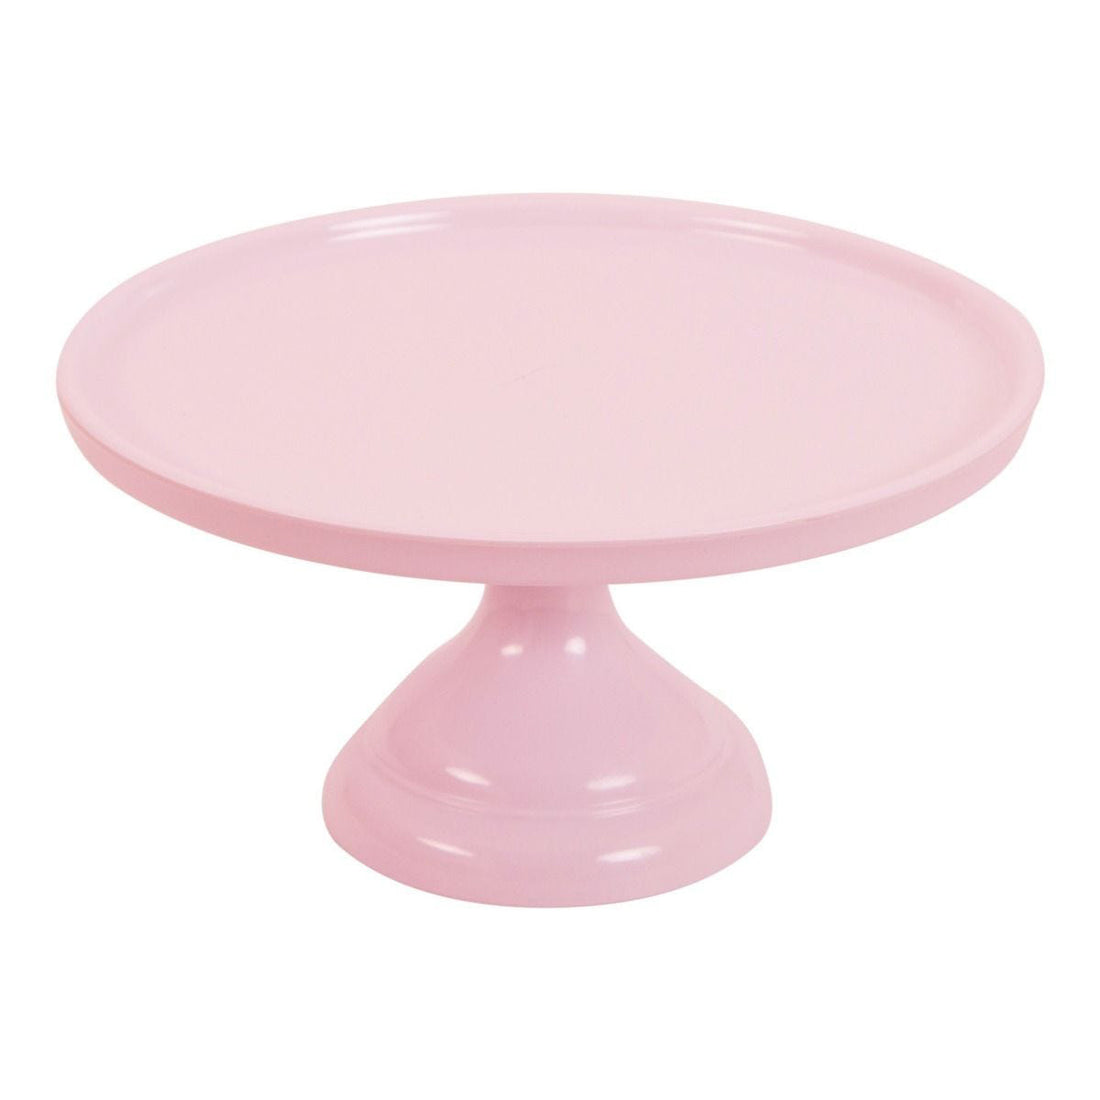 Cream Melamine Wave Cake Stand - By A Lovely Little Company - Pinks & Green